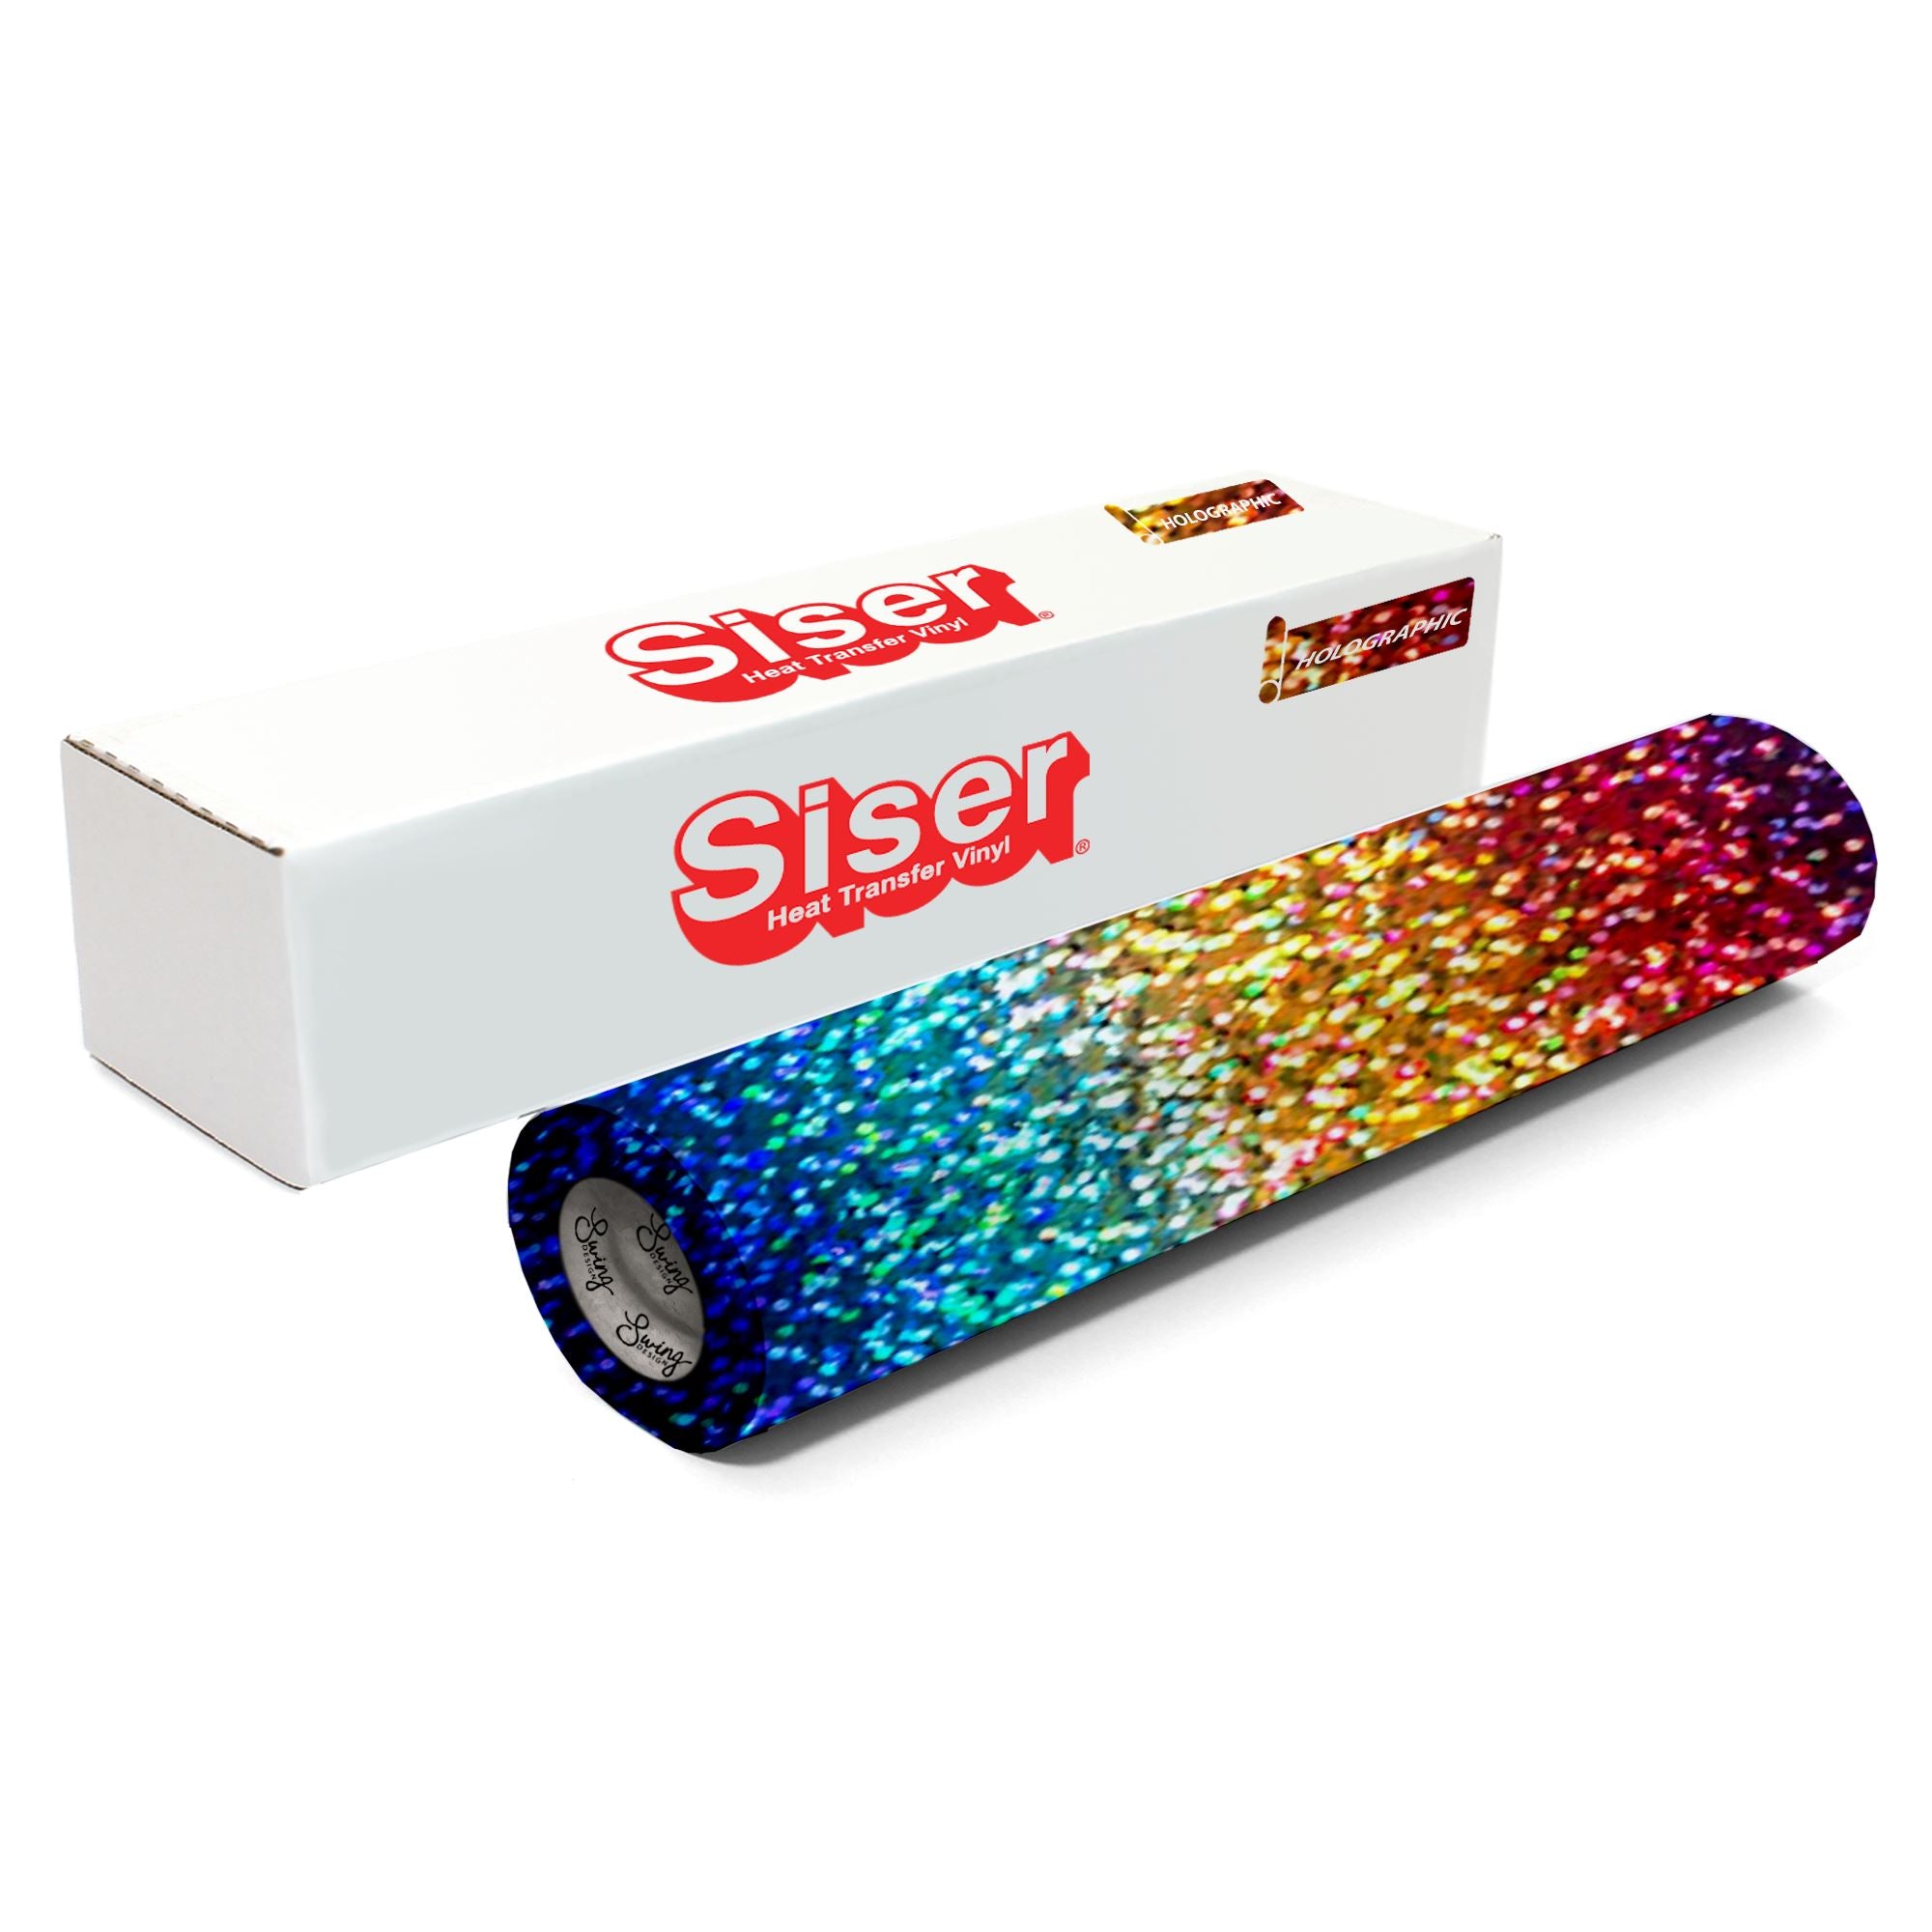 Siser Holographic Heat Transfer Vinyl (HTV) - 15 x 150 ft - 17 Colors Available - Rainbow